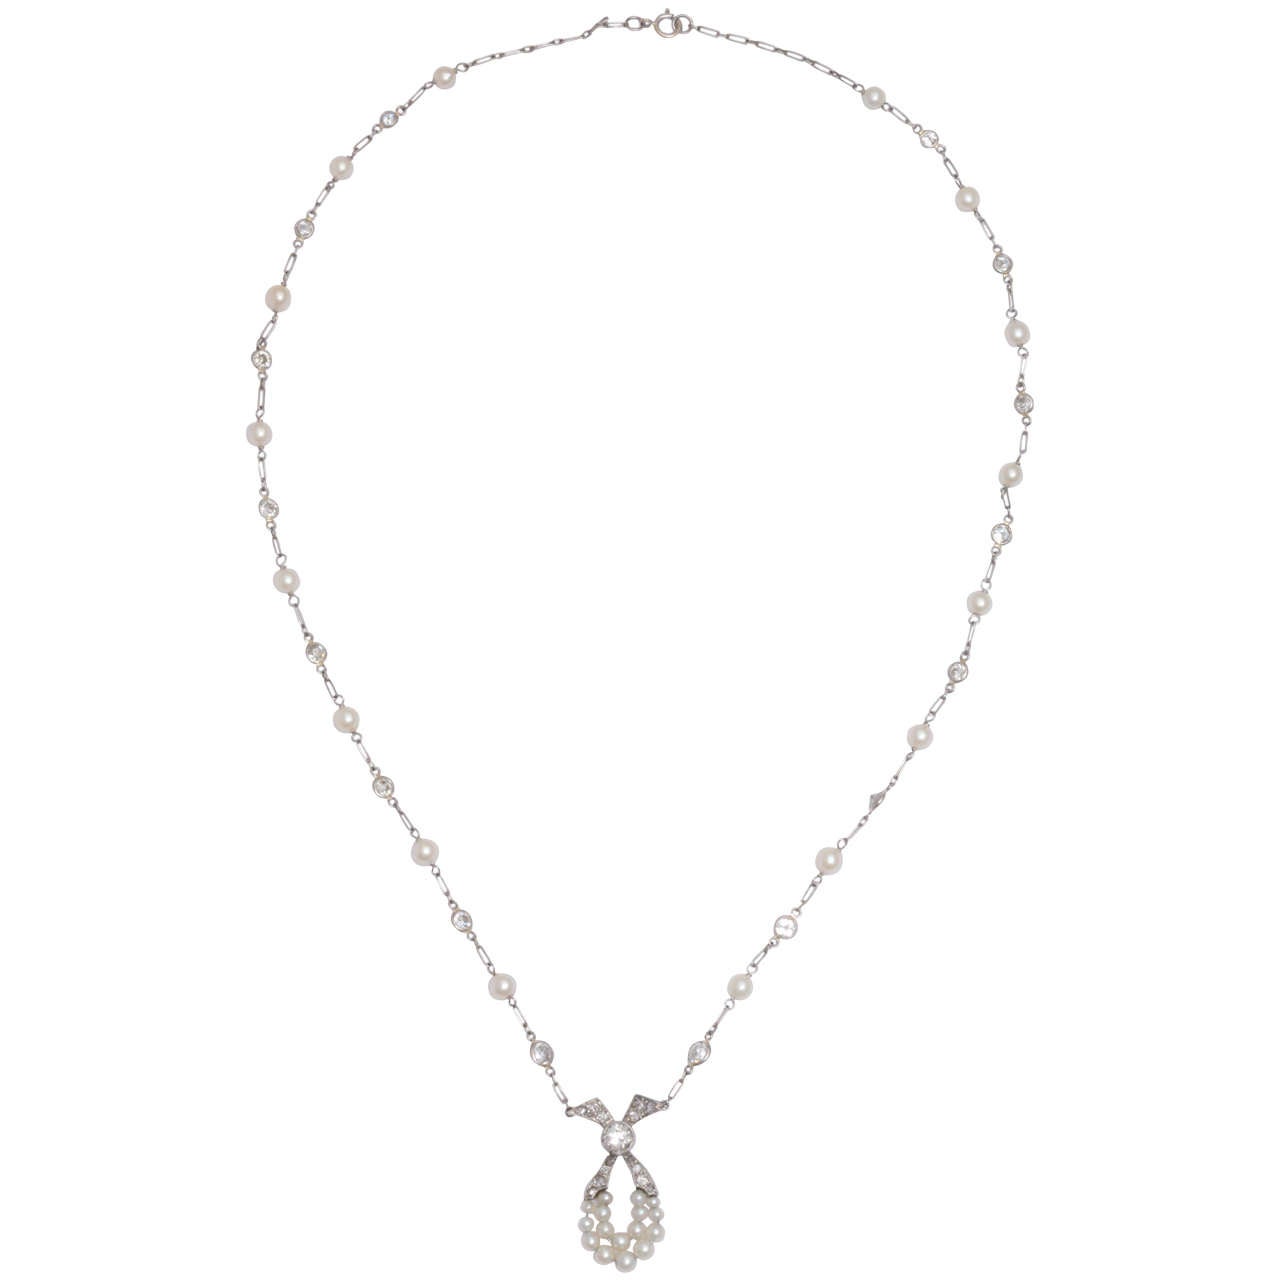 Edwardian Pearl and Diamond by the yard Pendant Necklace